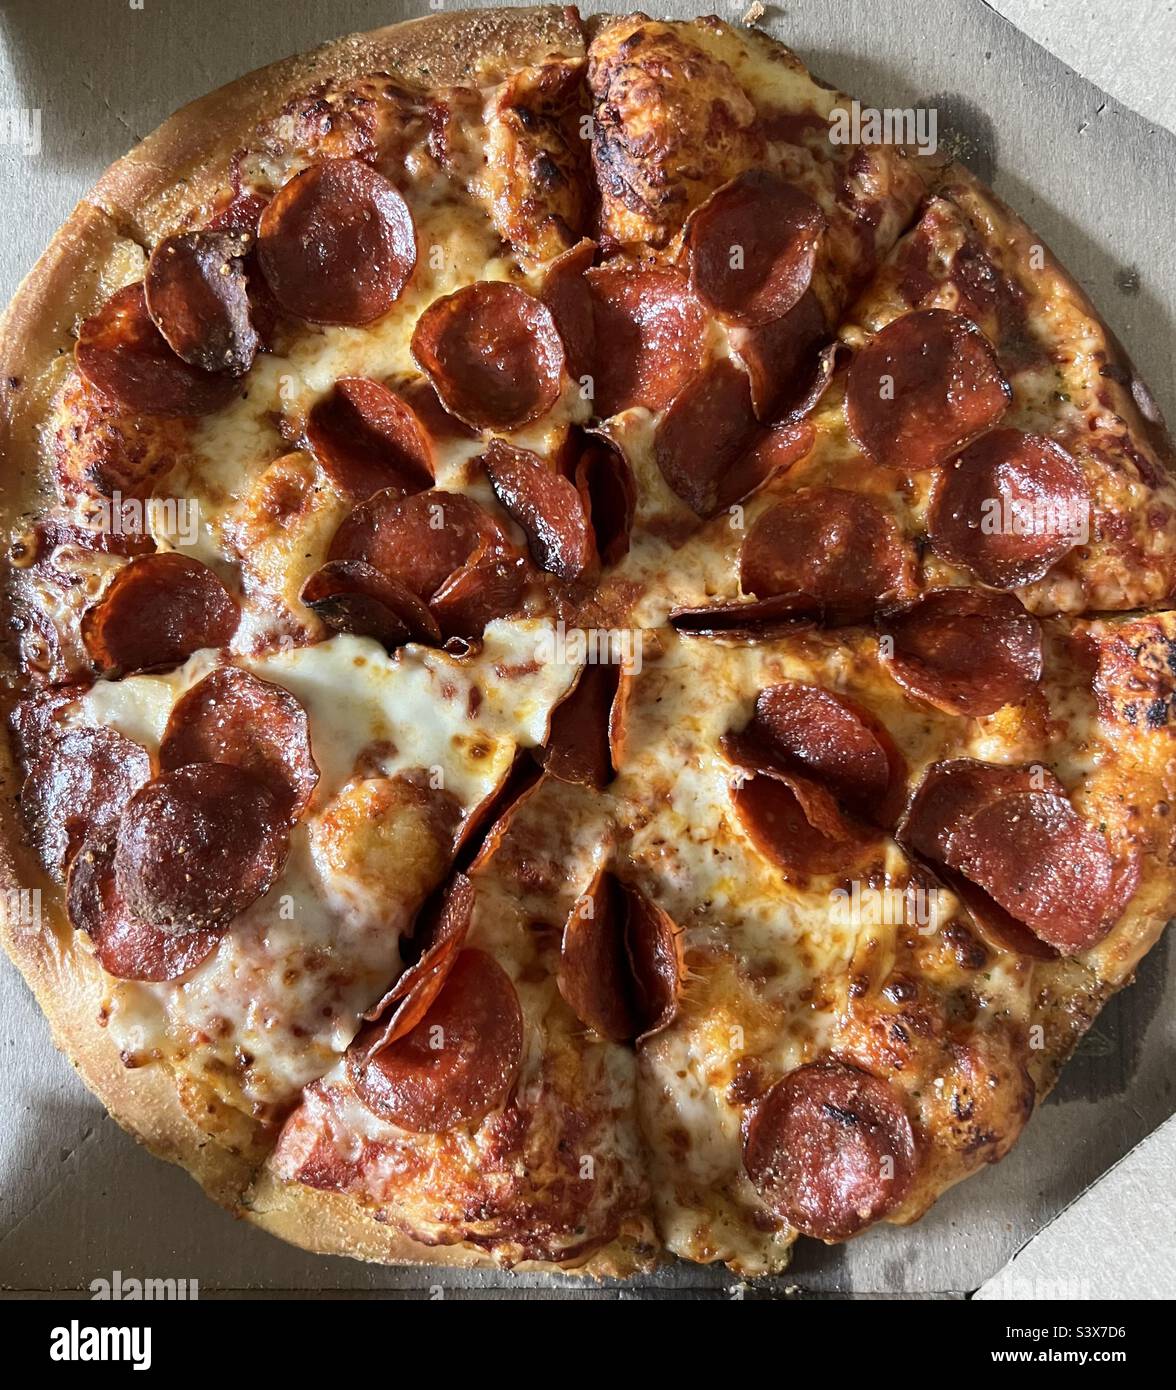 Top view of pepperoni pizza Stock Photo